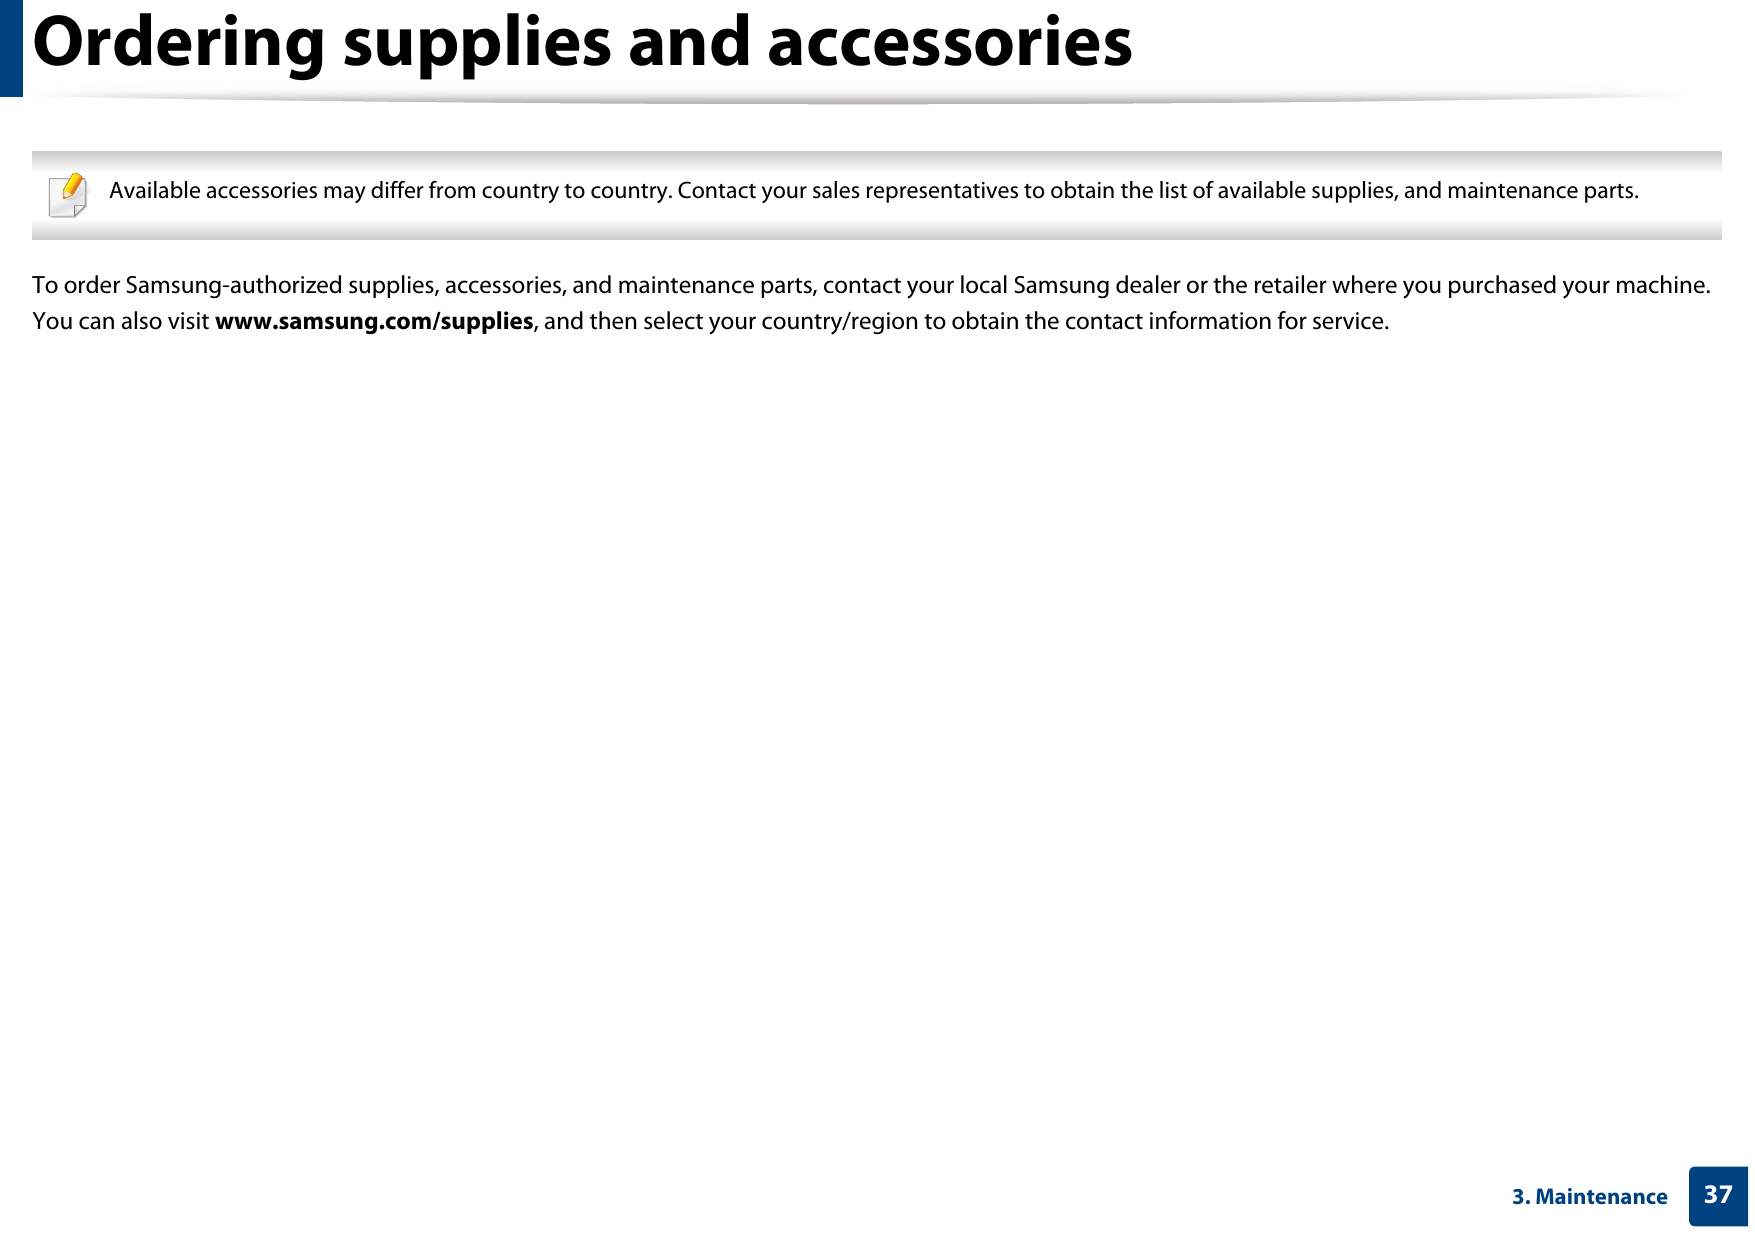 373. MaintenanceOrdering supplies and accessories Available accessories may differ from country to country. Contact your sales representatives to obtain the list of available supplies, and maintenance parts. To order Samsung-authorized supplies, accessories, and maintenance parts, contact your local Samsung dealer or the retailer where you purchased your machine. You can also visit www.samsung.com/supplies, and then select your country/region to obtain the contact information for service.